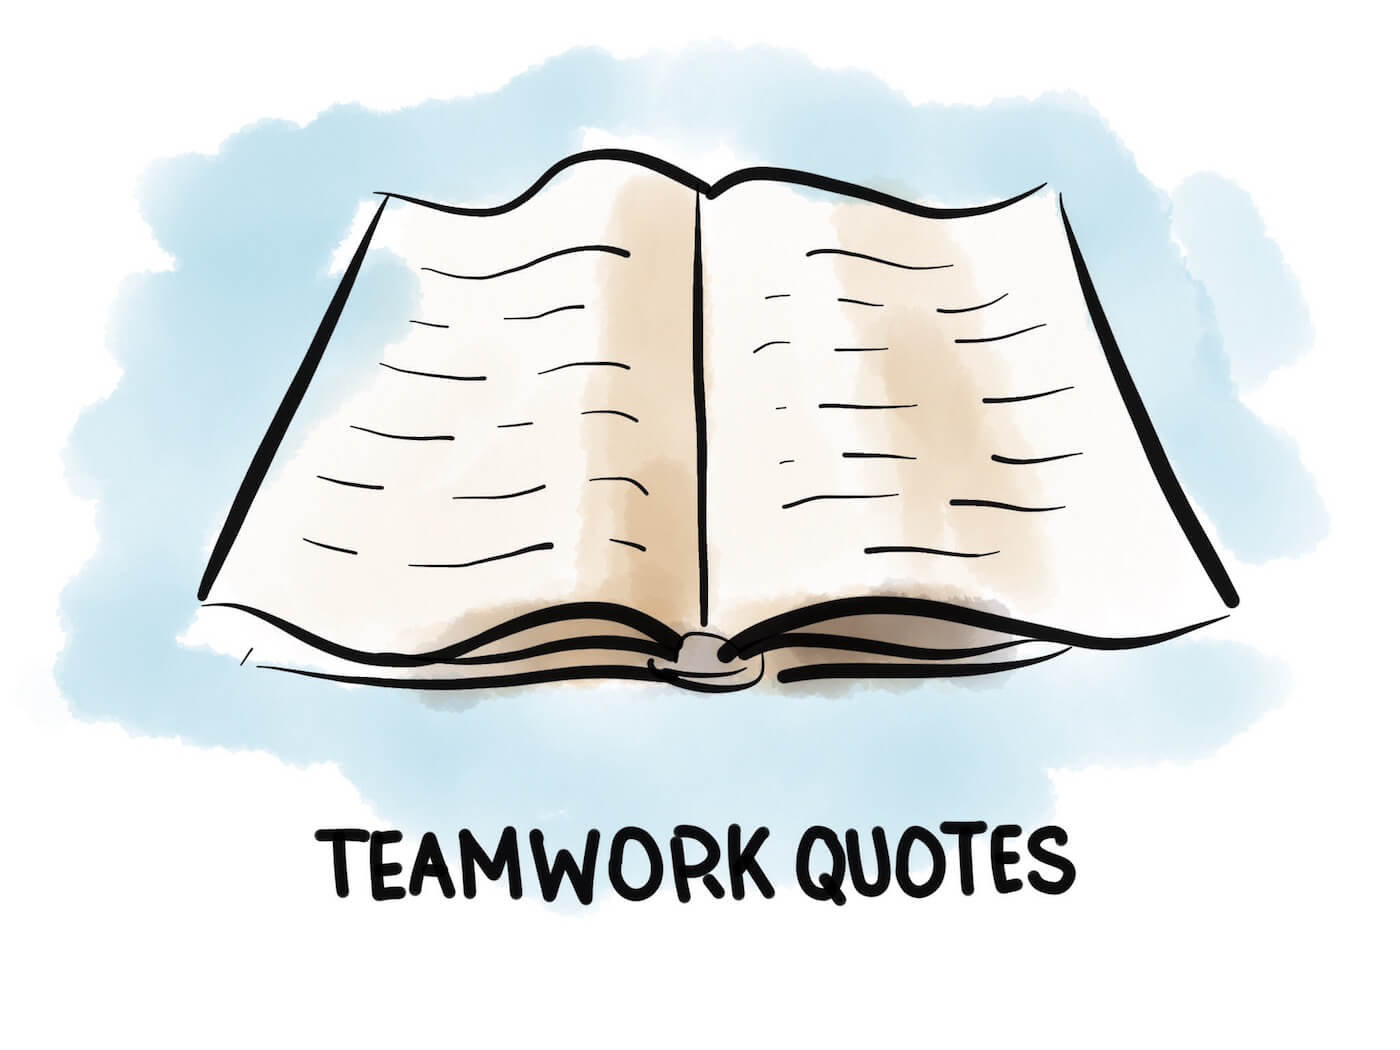 Teamwork Quotes That Make Your Team Really Work Together